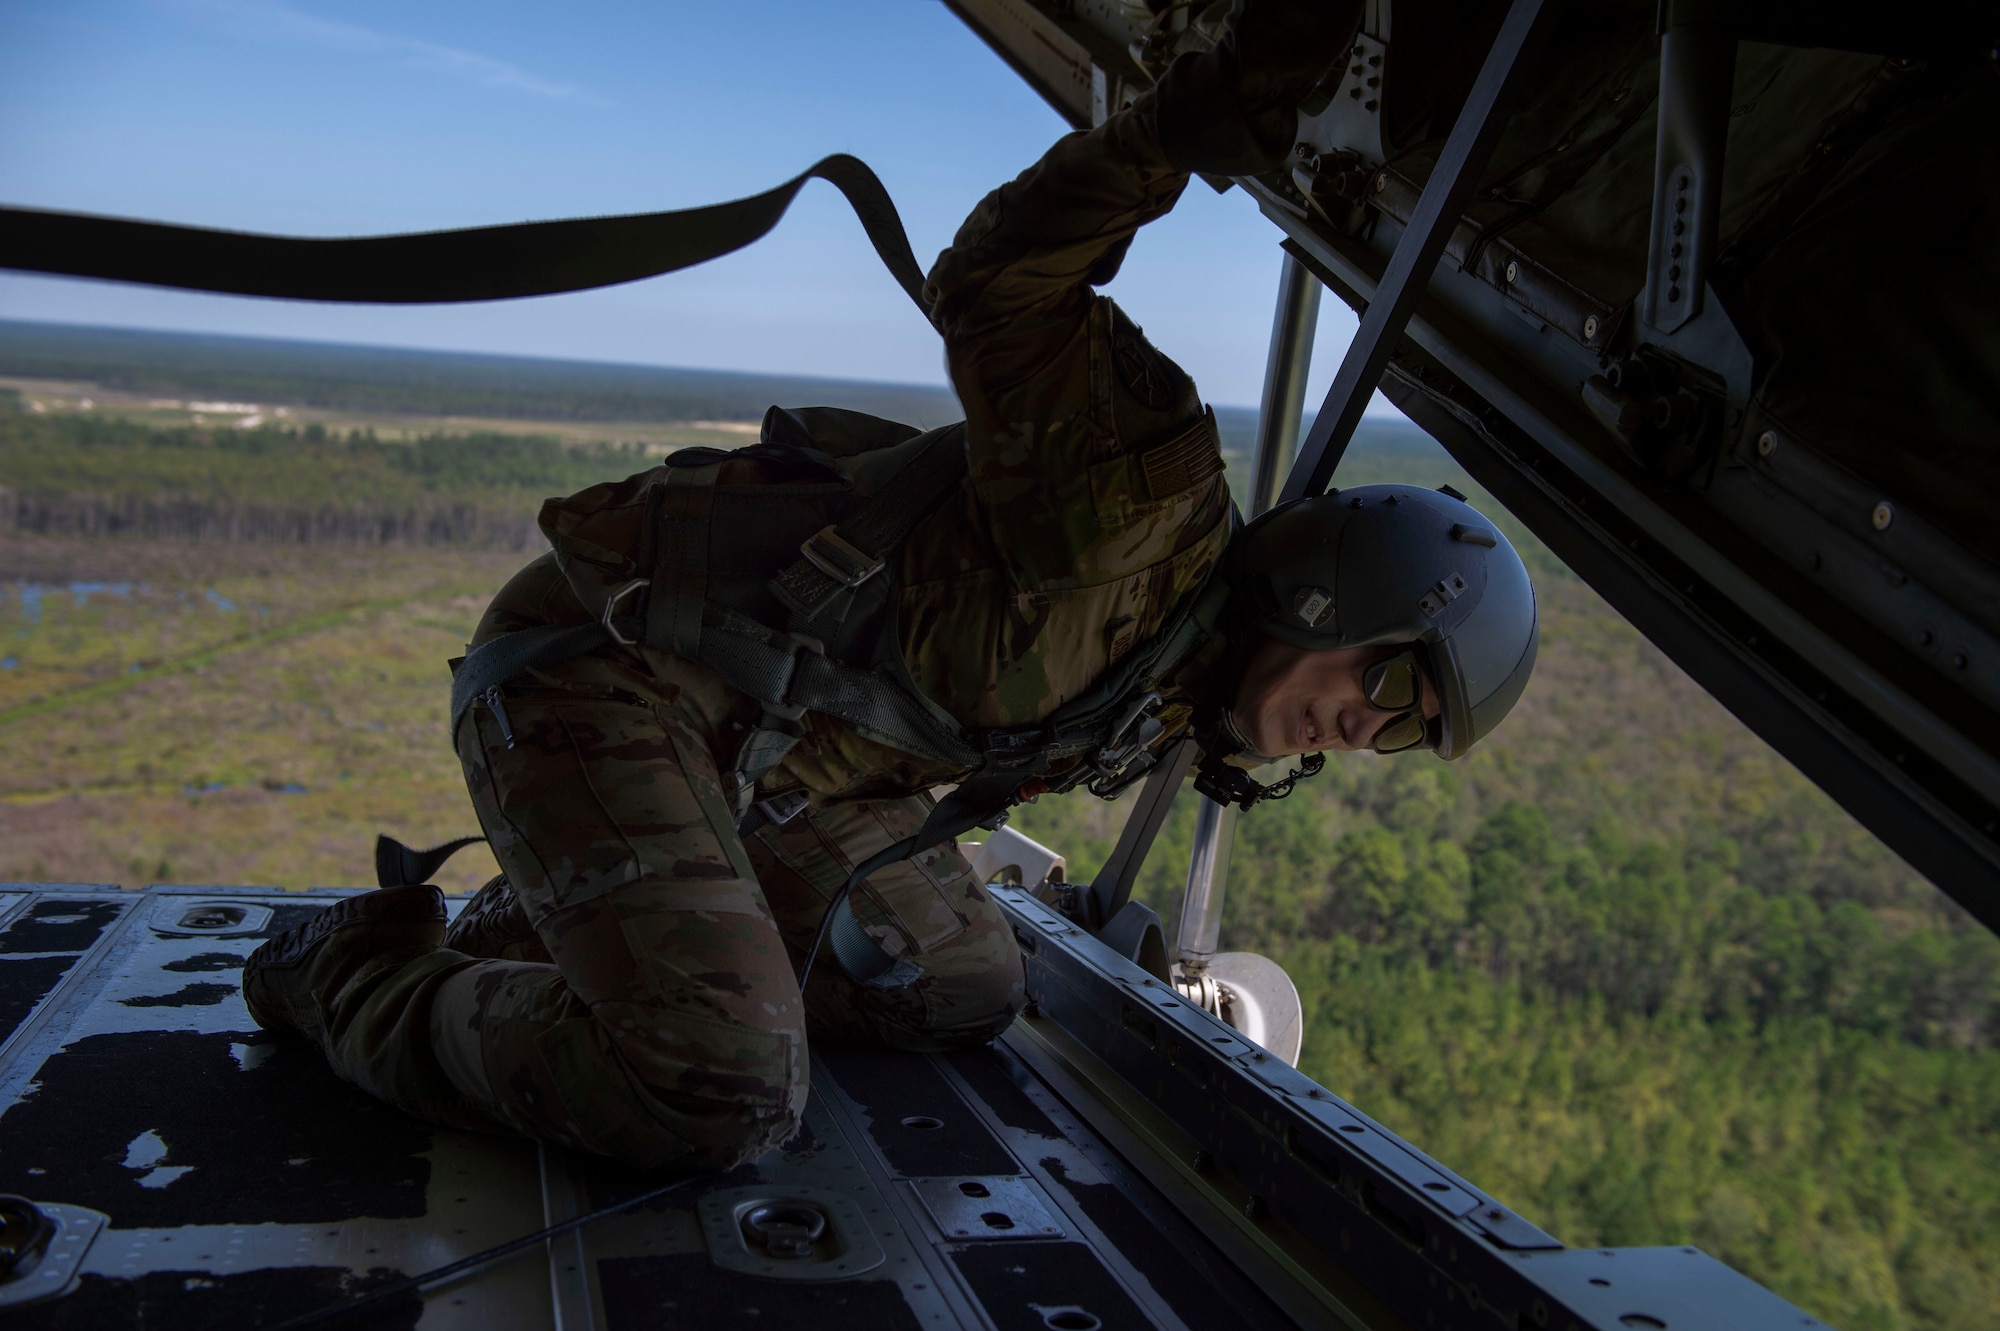 Tech. Sgt. Colleen McGahuey-Ramsey, 71st Rescue Squadron (RQS) loadmaster, visually confirms the target for a loadmaster directed rescue drop Sept. 6, 2019, at Moody Air Force Base, Ga. This was the first flight for the 71st RQS and the HC-130J Combat King II airframe to be operated by an all-female aircrew. The 71st RQS provides rapidly deployable, expeditionary personnel recovery forces for theater commanders for contingency and crisis response operations worldwide. (U.S. Air Force photo by 2nd Lt. Kaylin P. Hankerson)